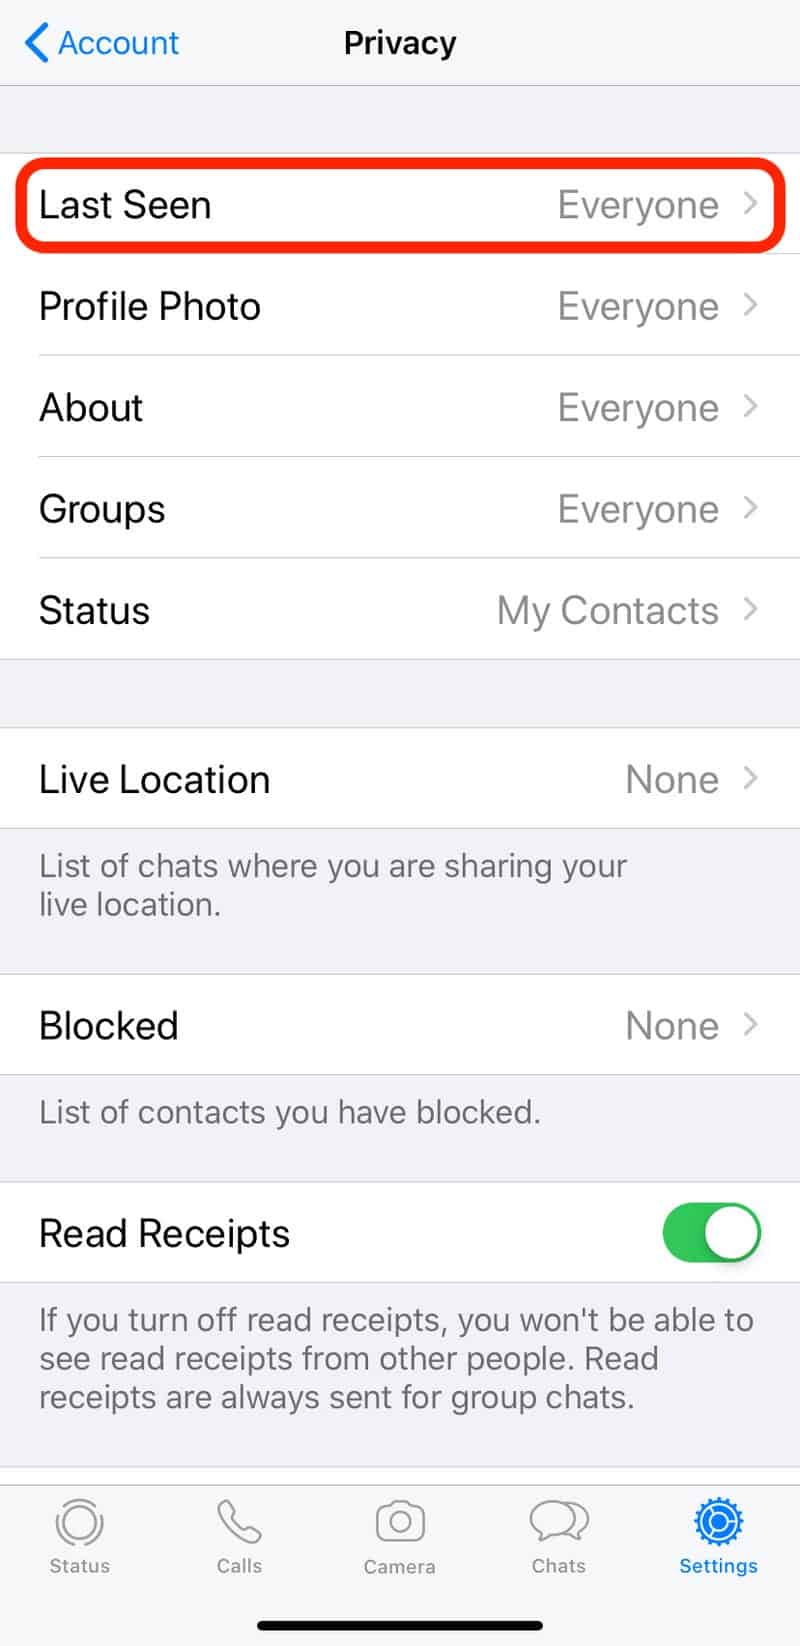 New privacy controls for WhatsApp will let you hide your 'Last Seen' status 